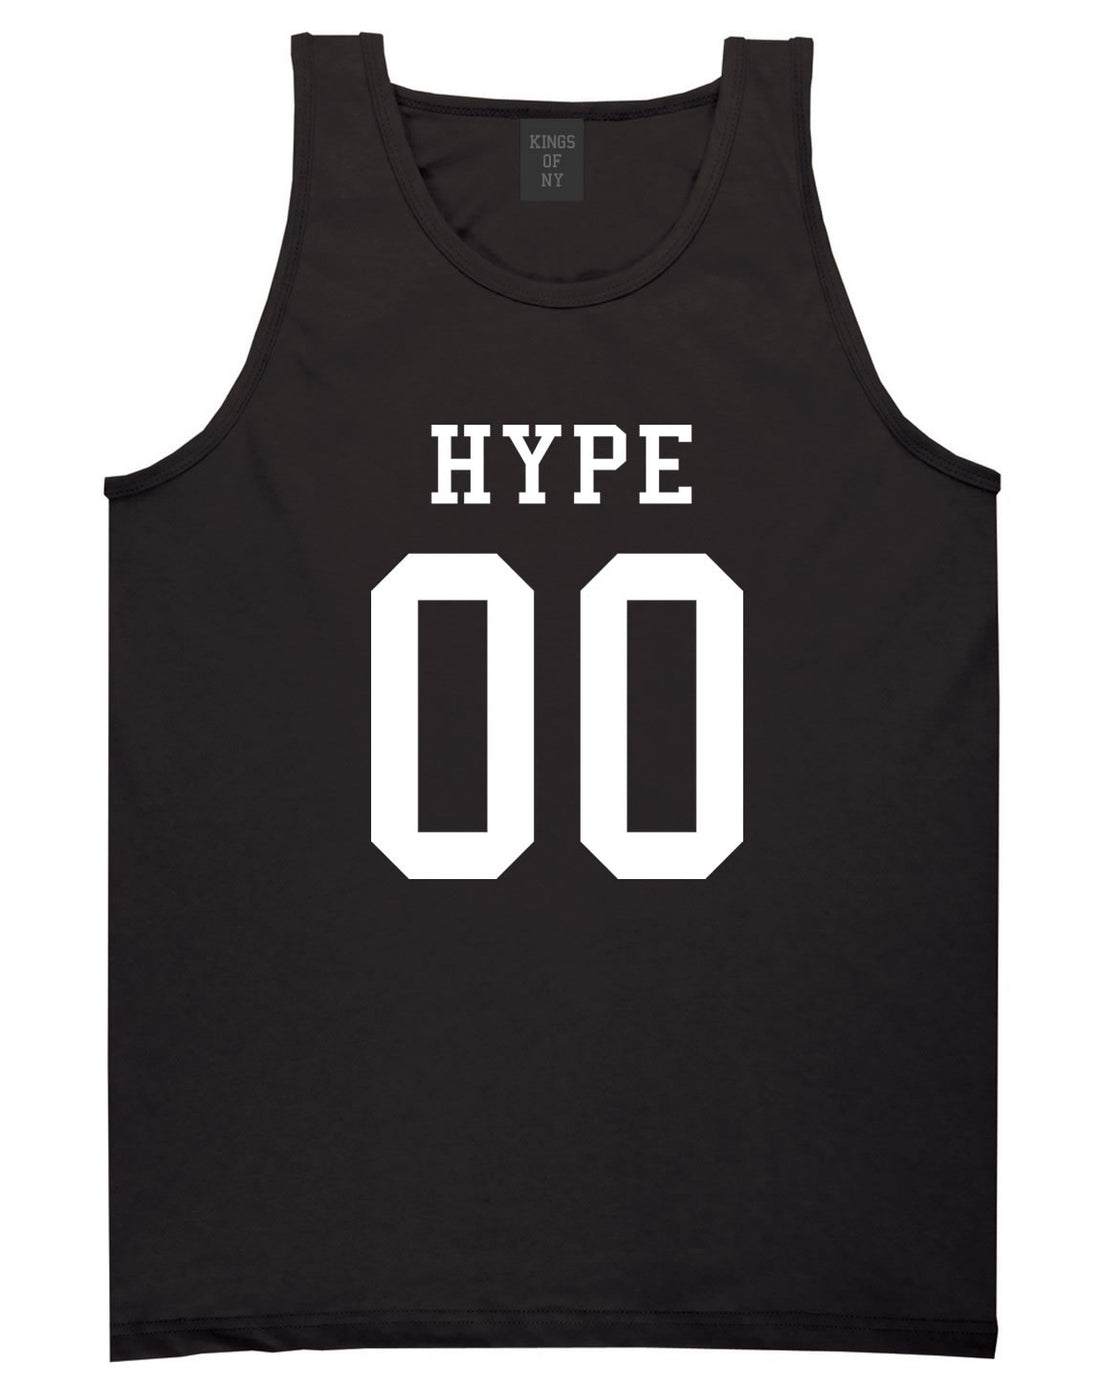 Hype Team Jersey Tank Top in Black By Kings Of NY